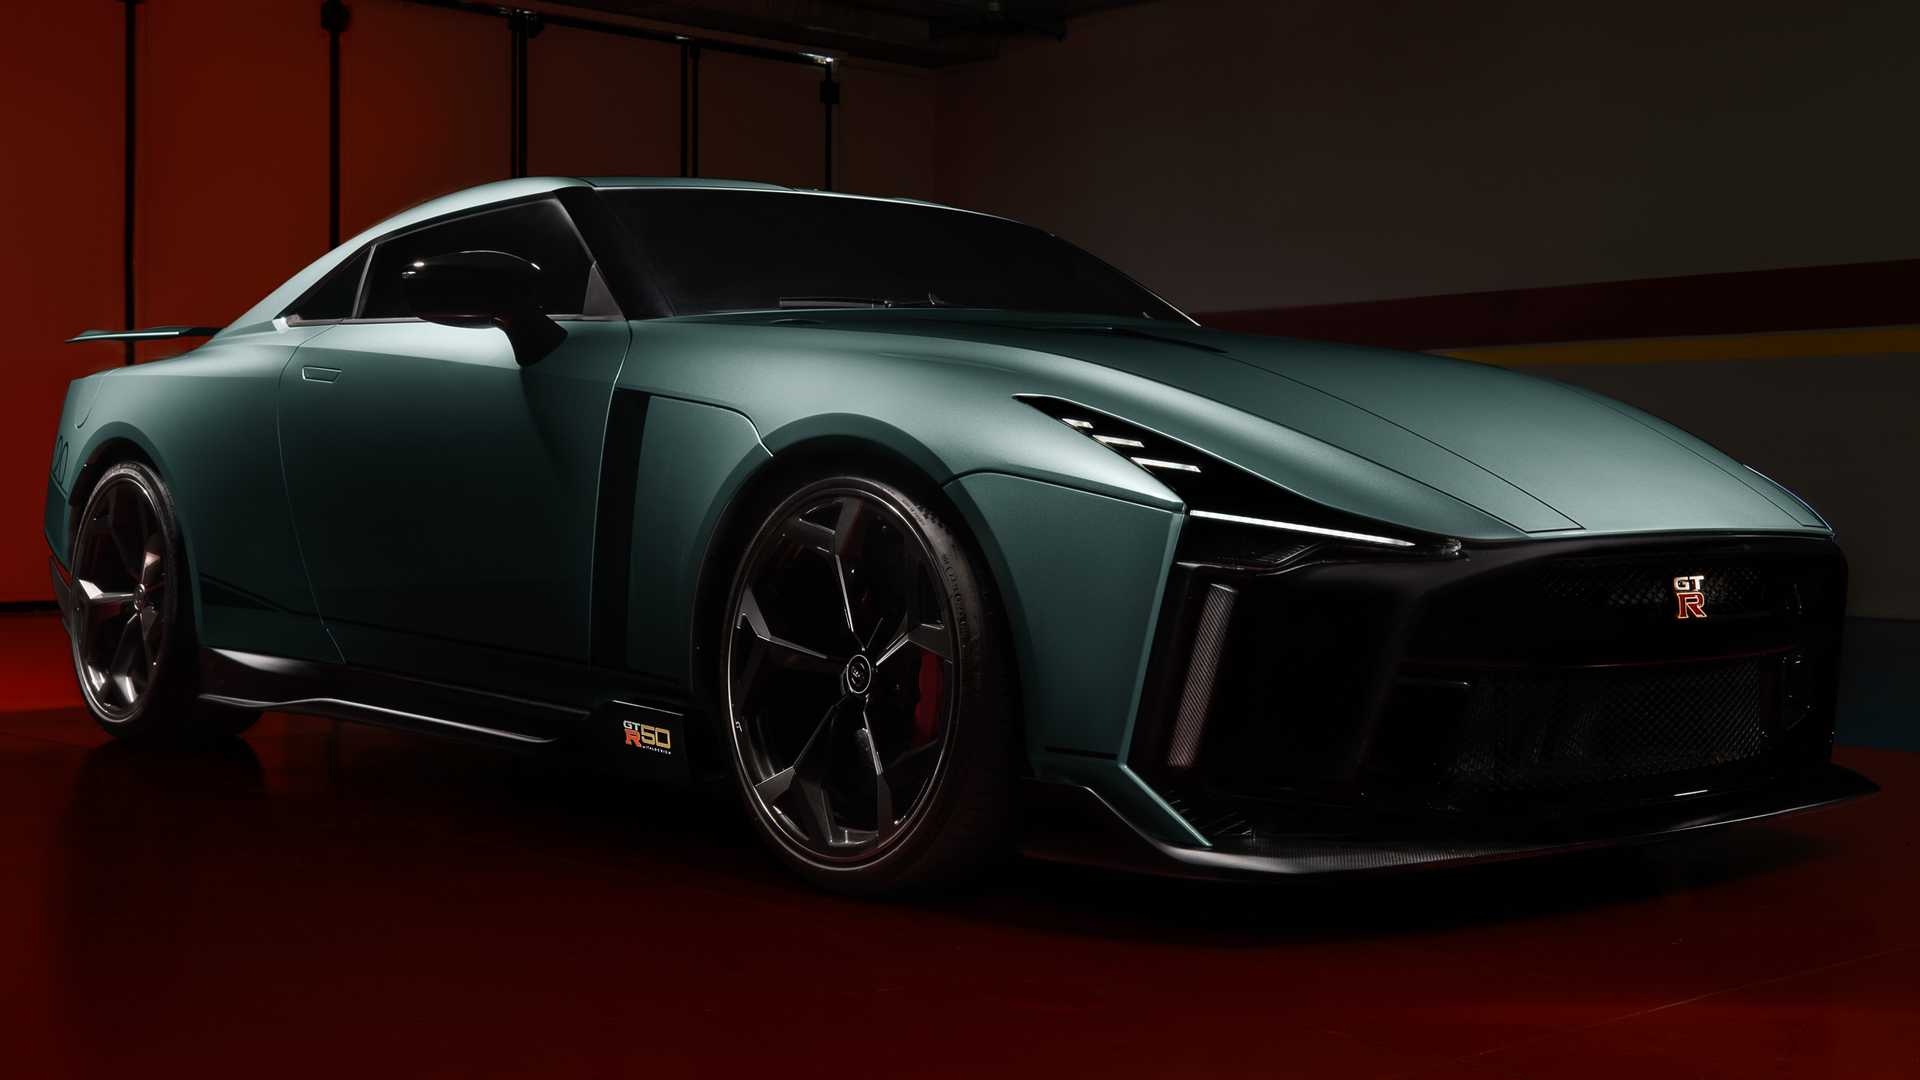 Nissan GT-R, Italdesign, Limited Edition, Expensive, 1920x1080 Full HD Desktop